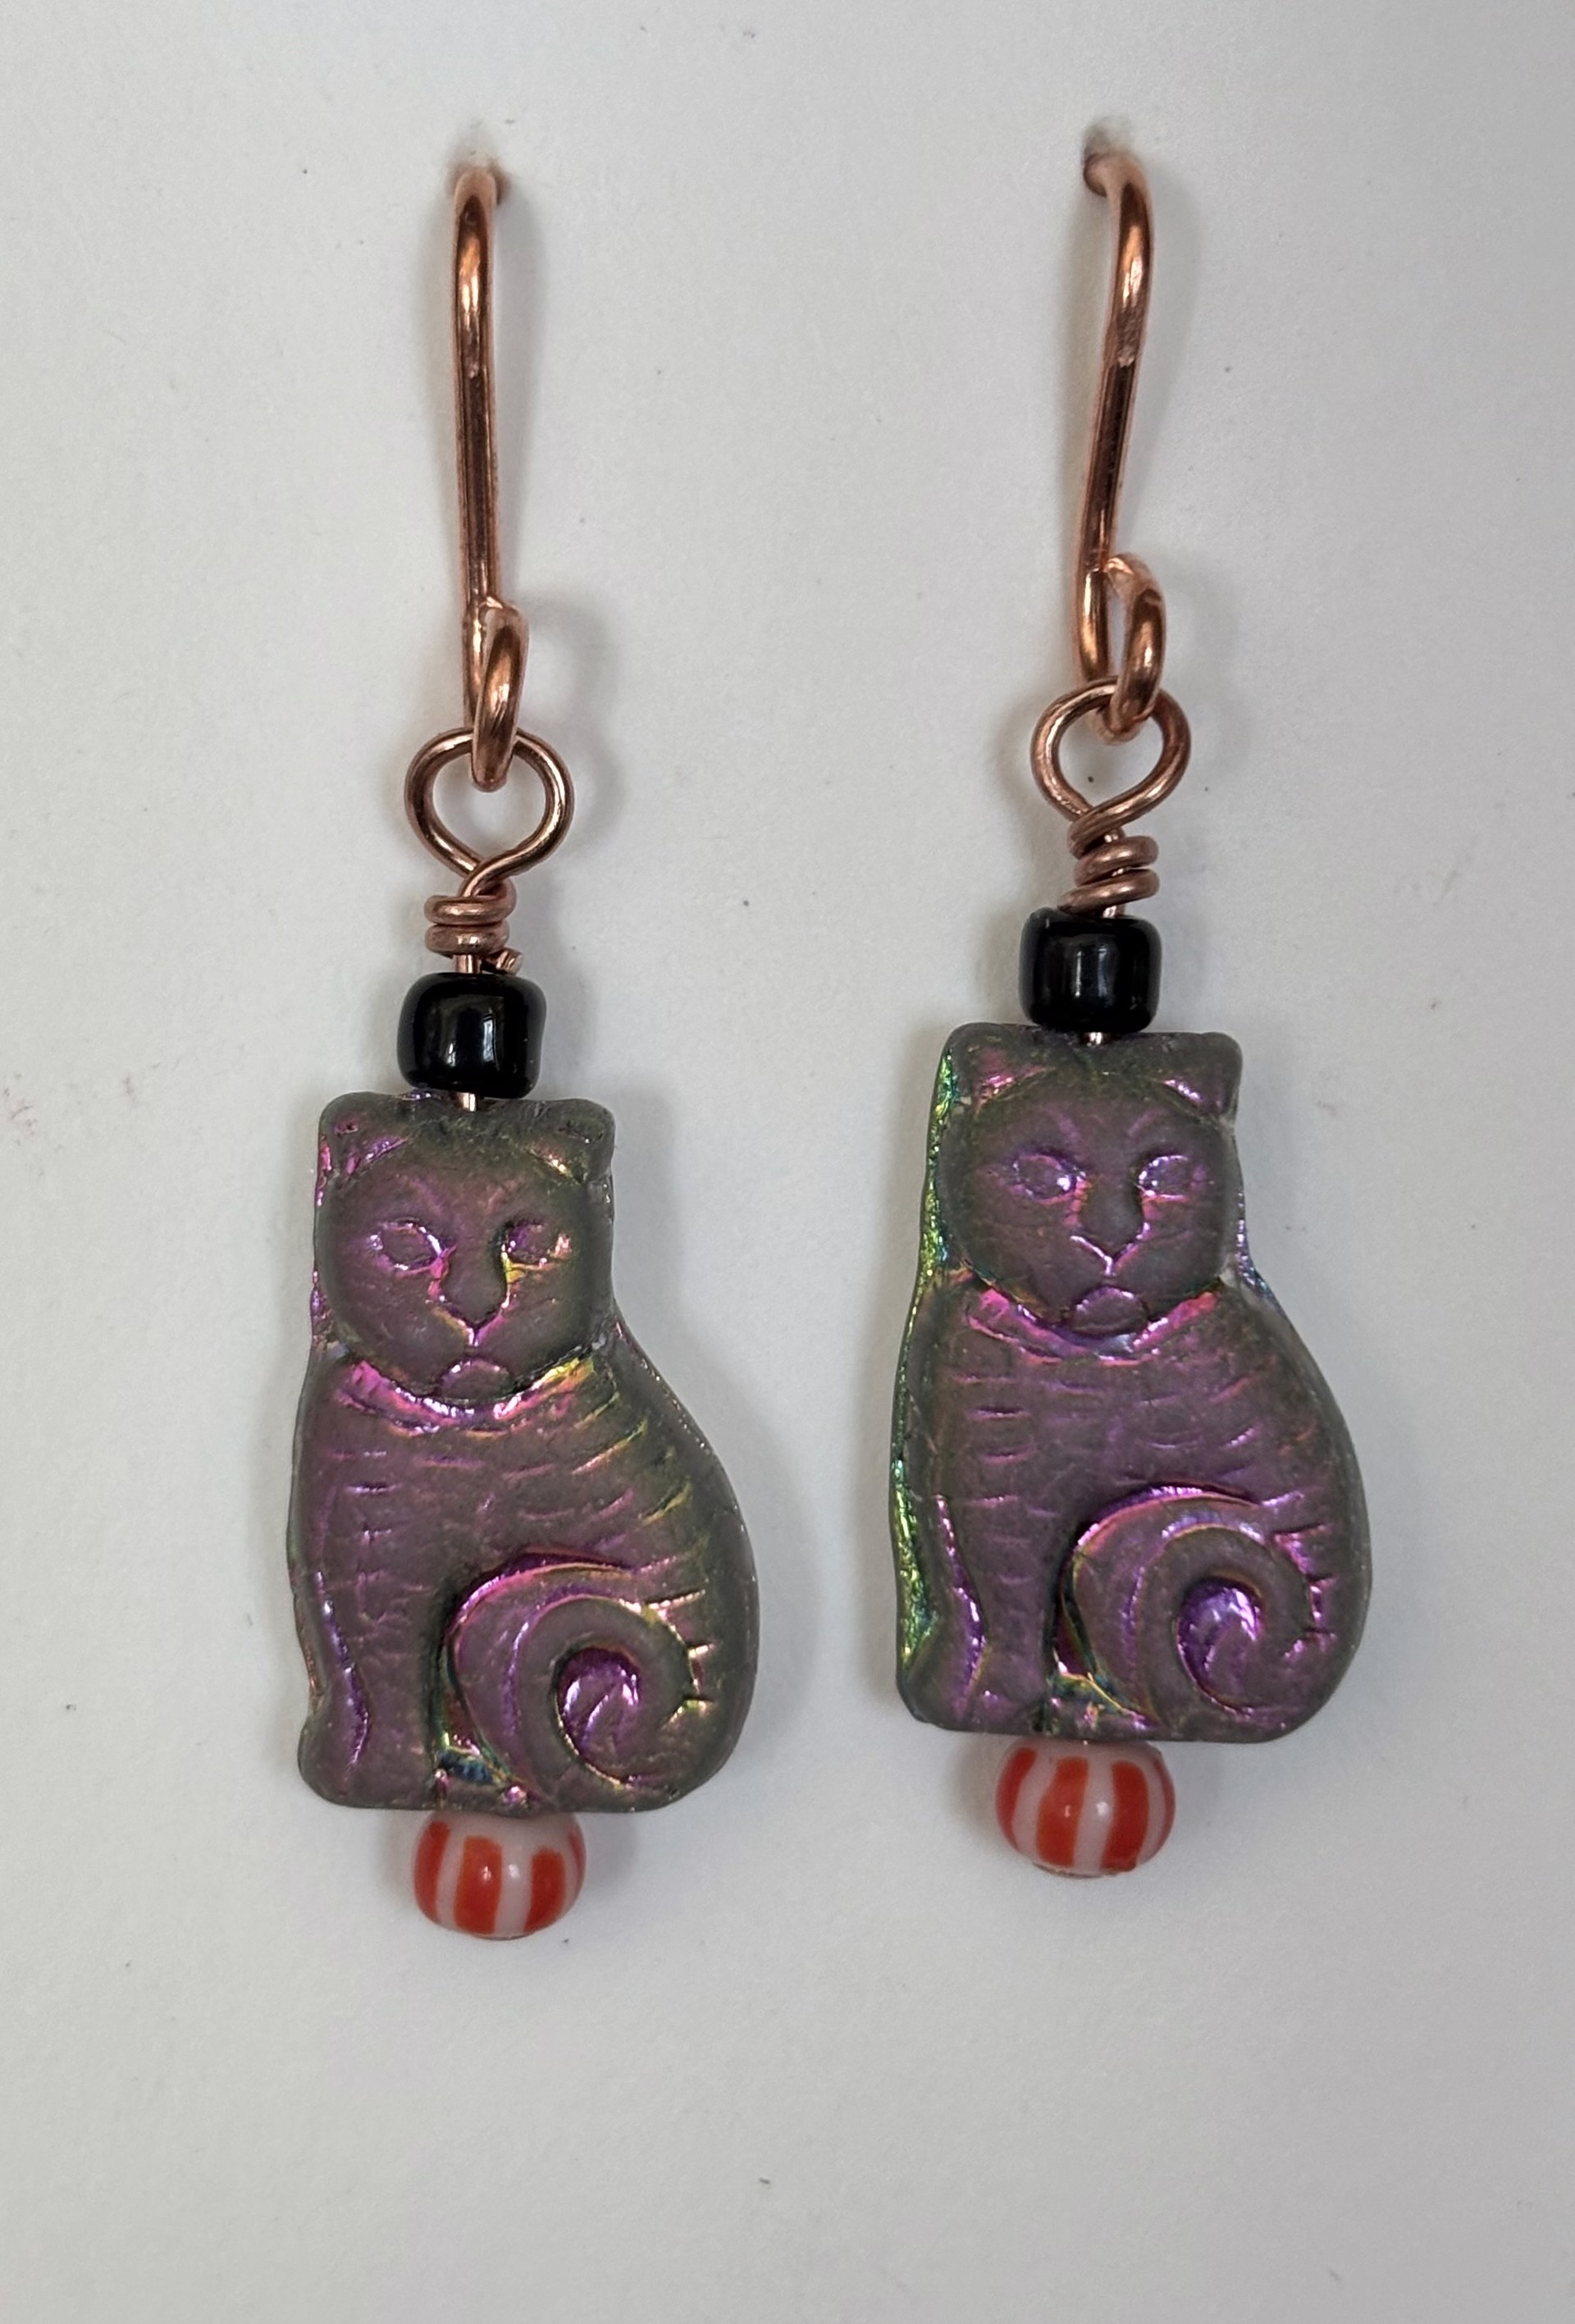 Gold Cats, Copper and Bead Earrings by Emelie Hebert